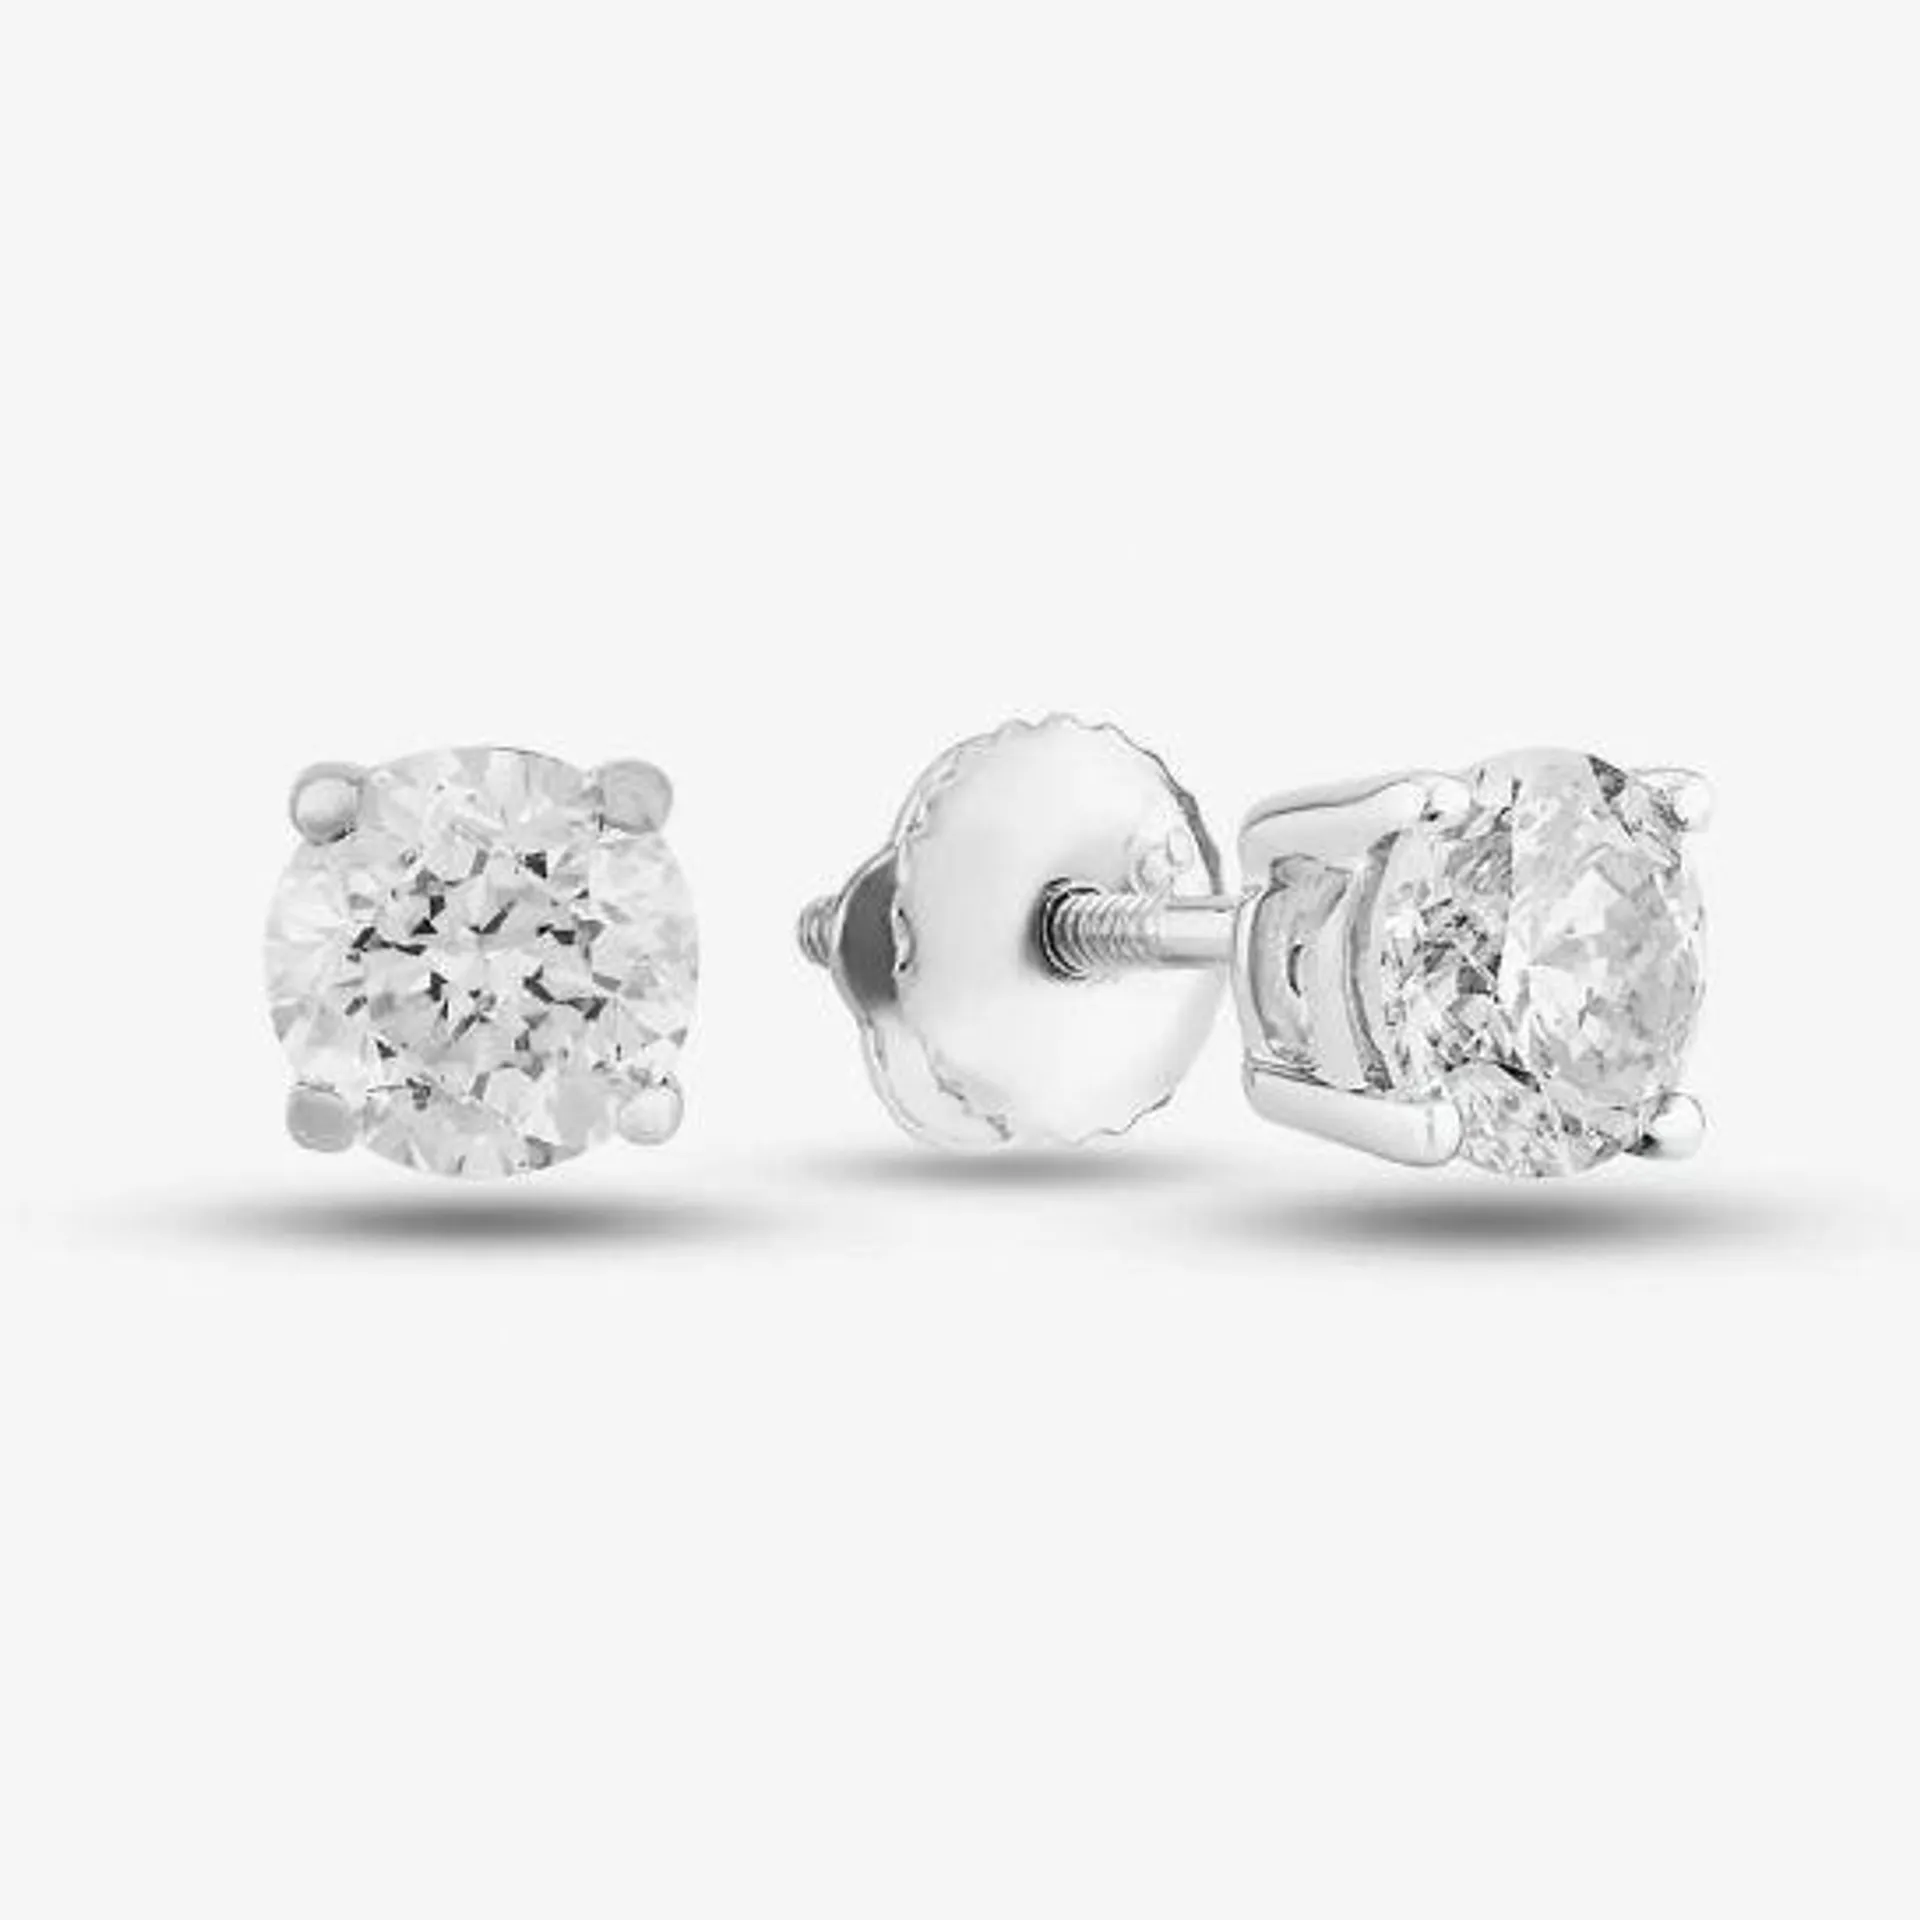 18ct White Gold 1.00ct Four Claw Diamond Stud Earrings THE2534-100W